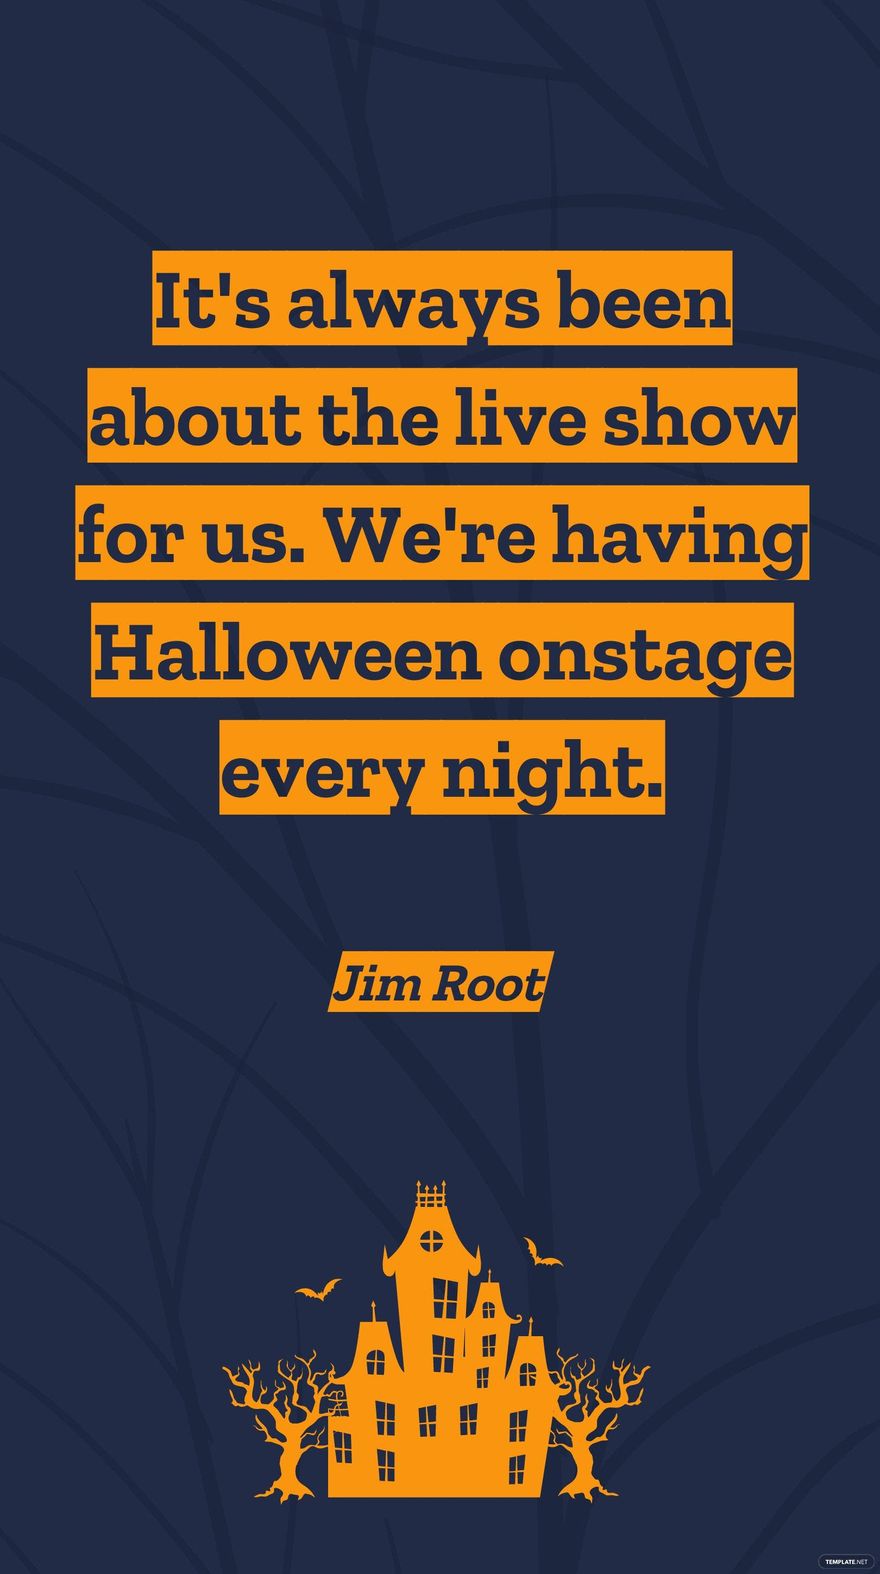 Jim Root - It's always been about the live show for us. We're having Halloween onstage every night.